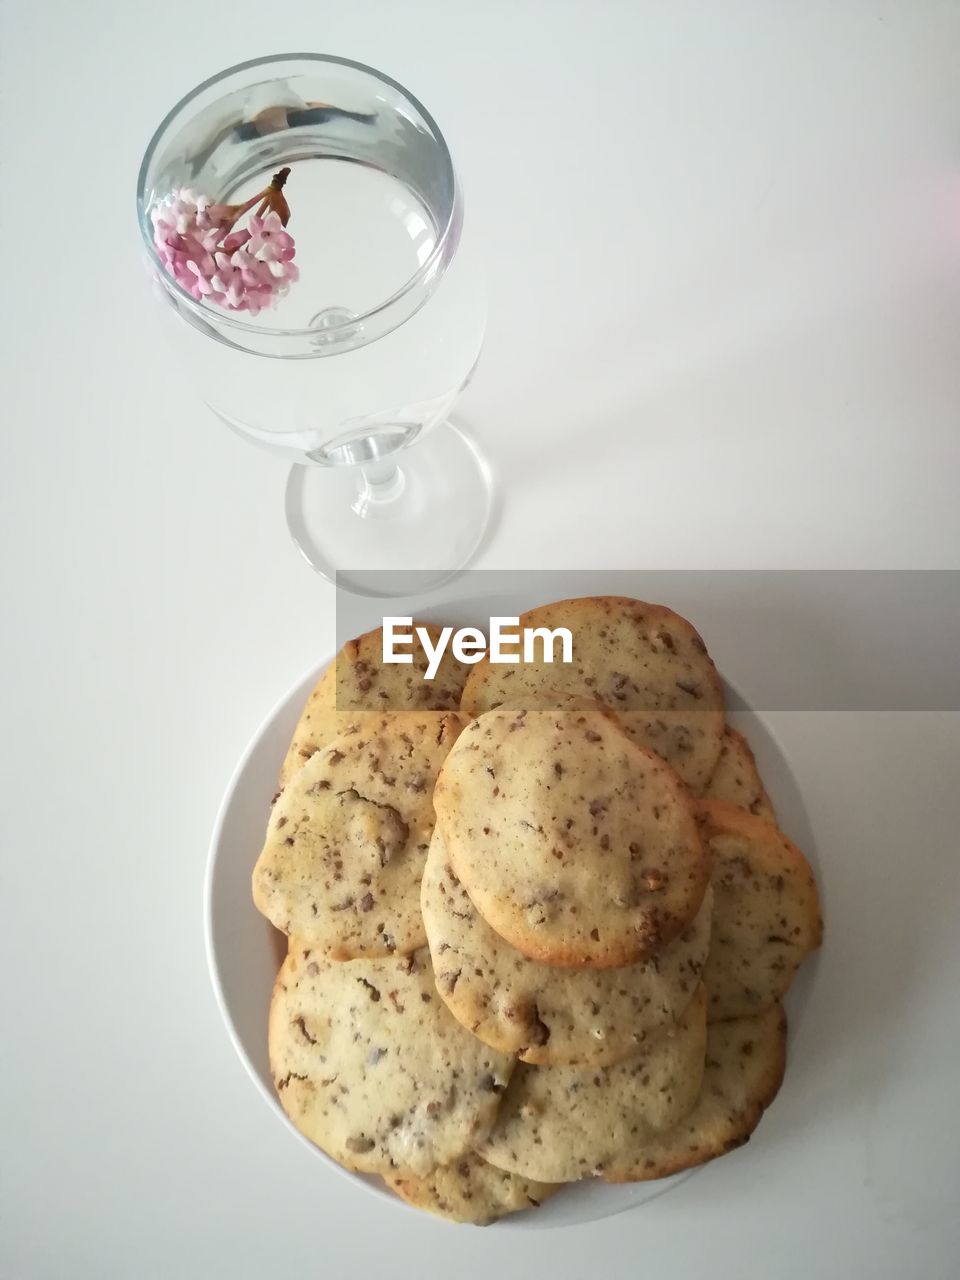 HIGH ANGLE VIEW OF COOKIES